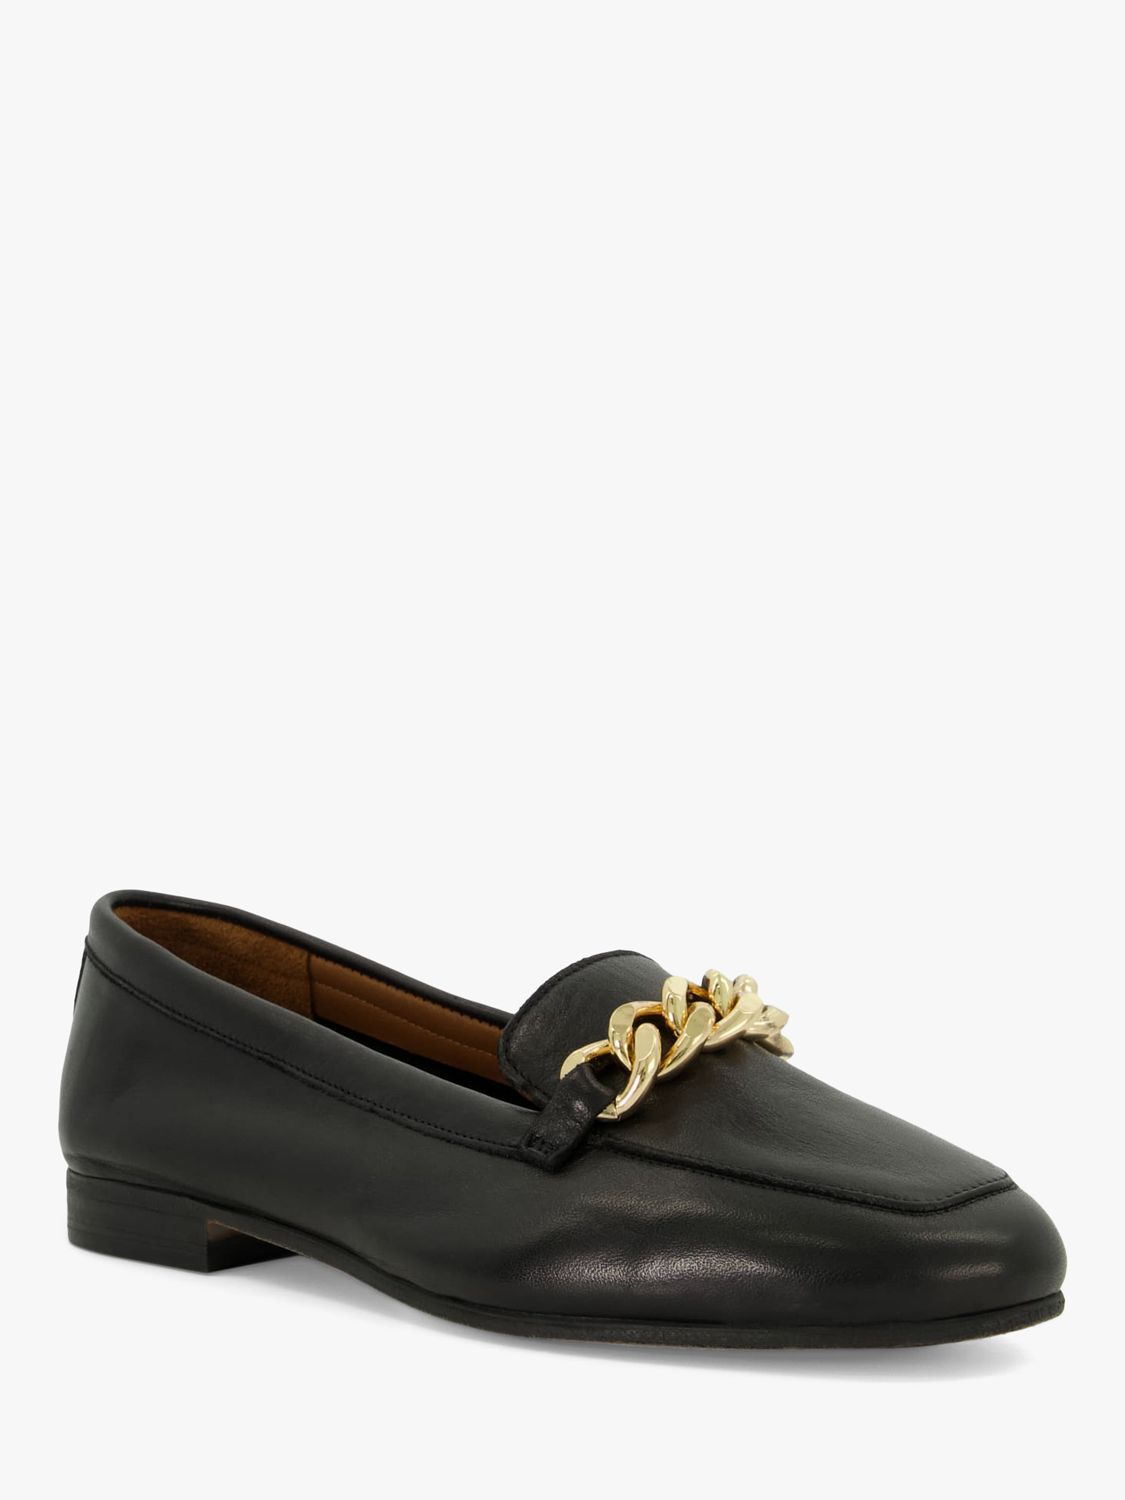 Dune Goldsmith Wide Fit Leather Chain Detail Loafers, Black, 3